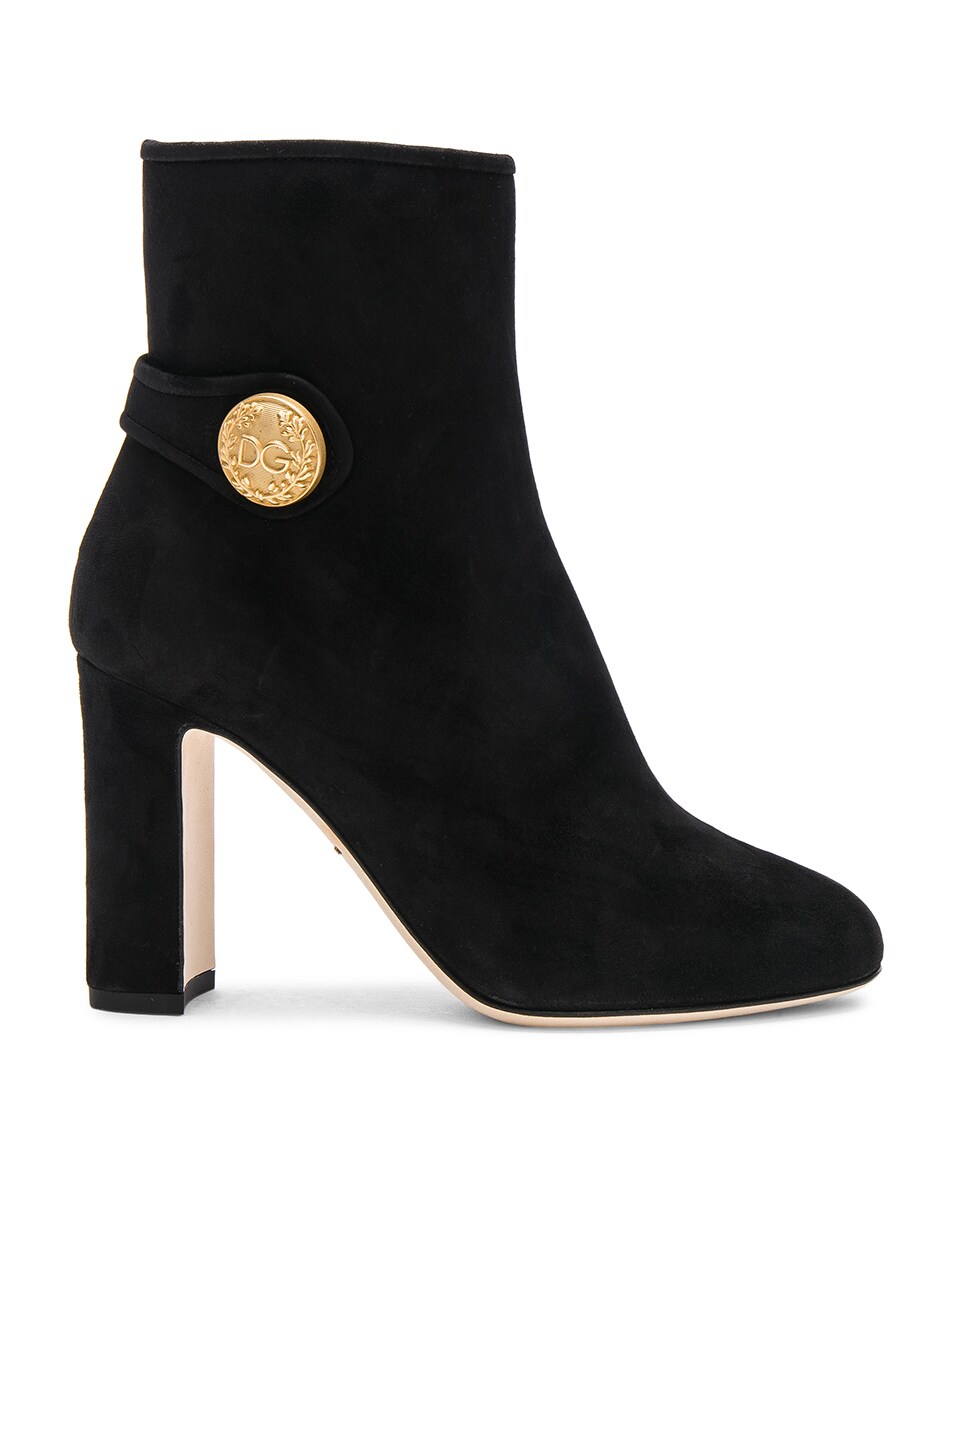 Image 1 of Dolce & Gabbana Side Button Suede Booties in Black